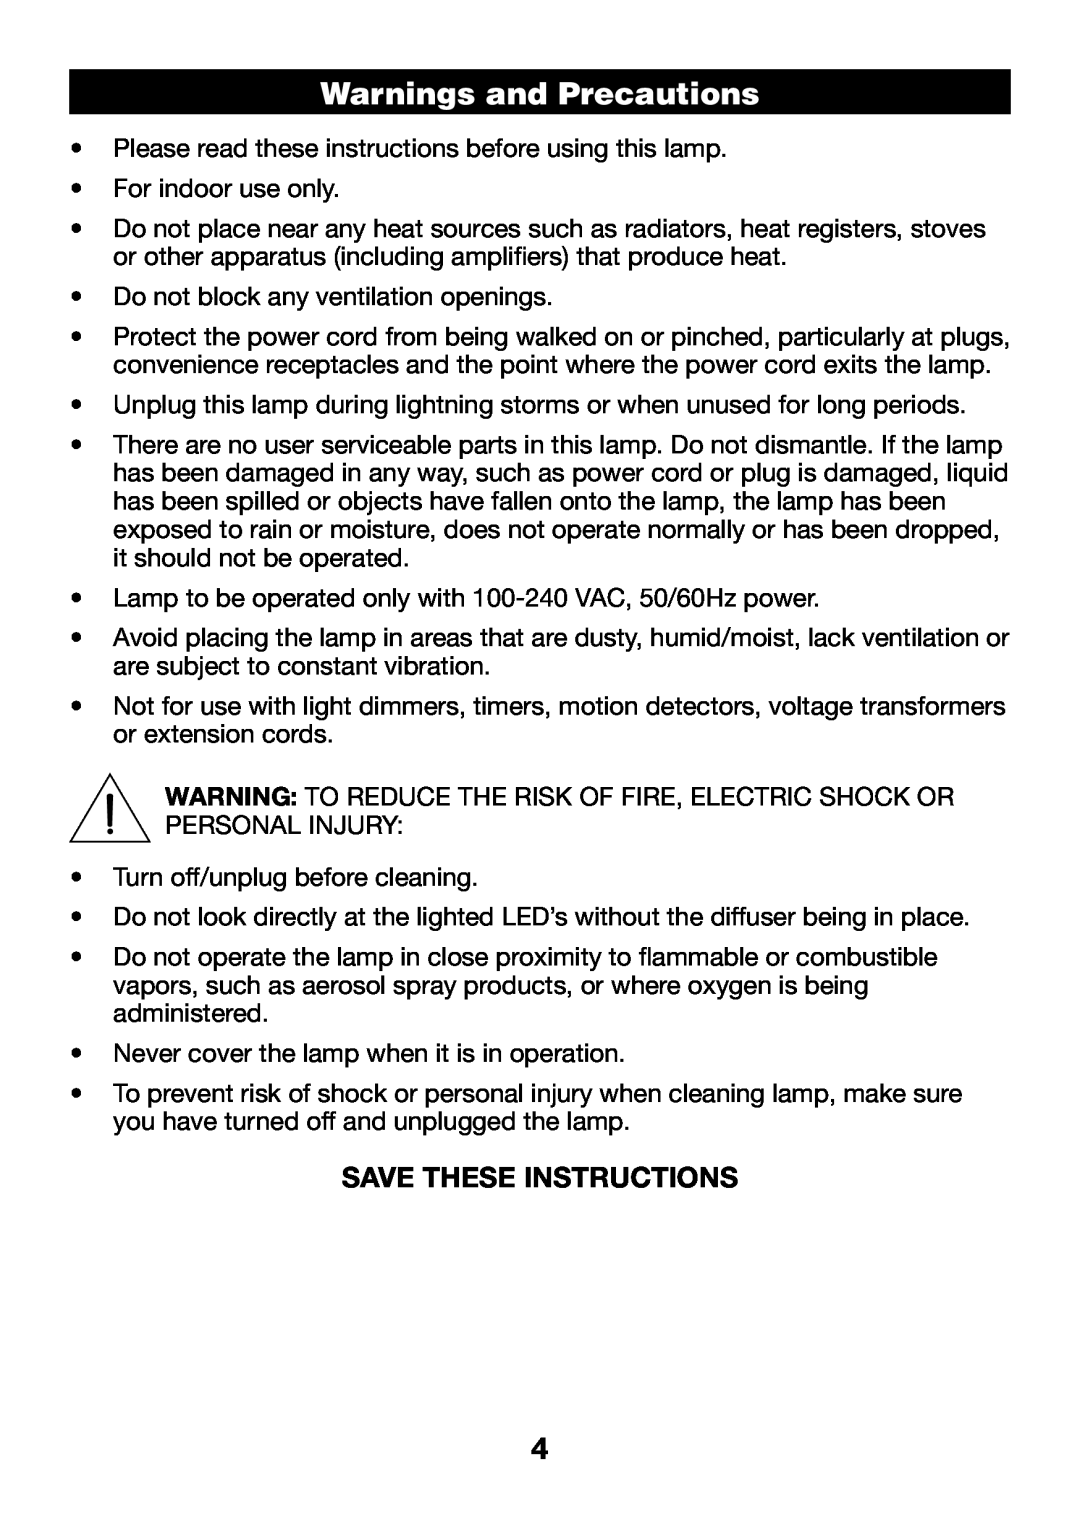 Verilux VD10 manual Warnings and Precautions, Save These Instructions 